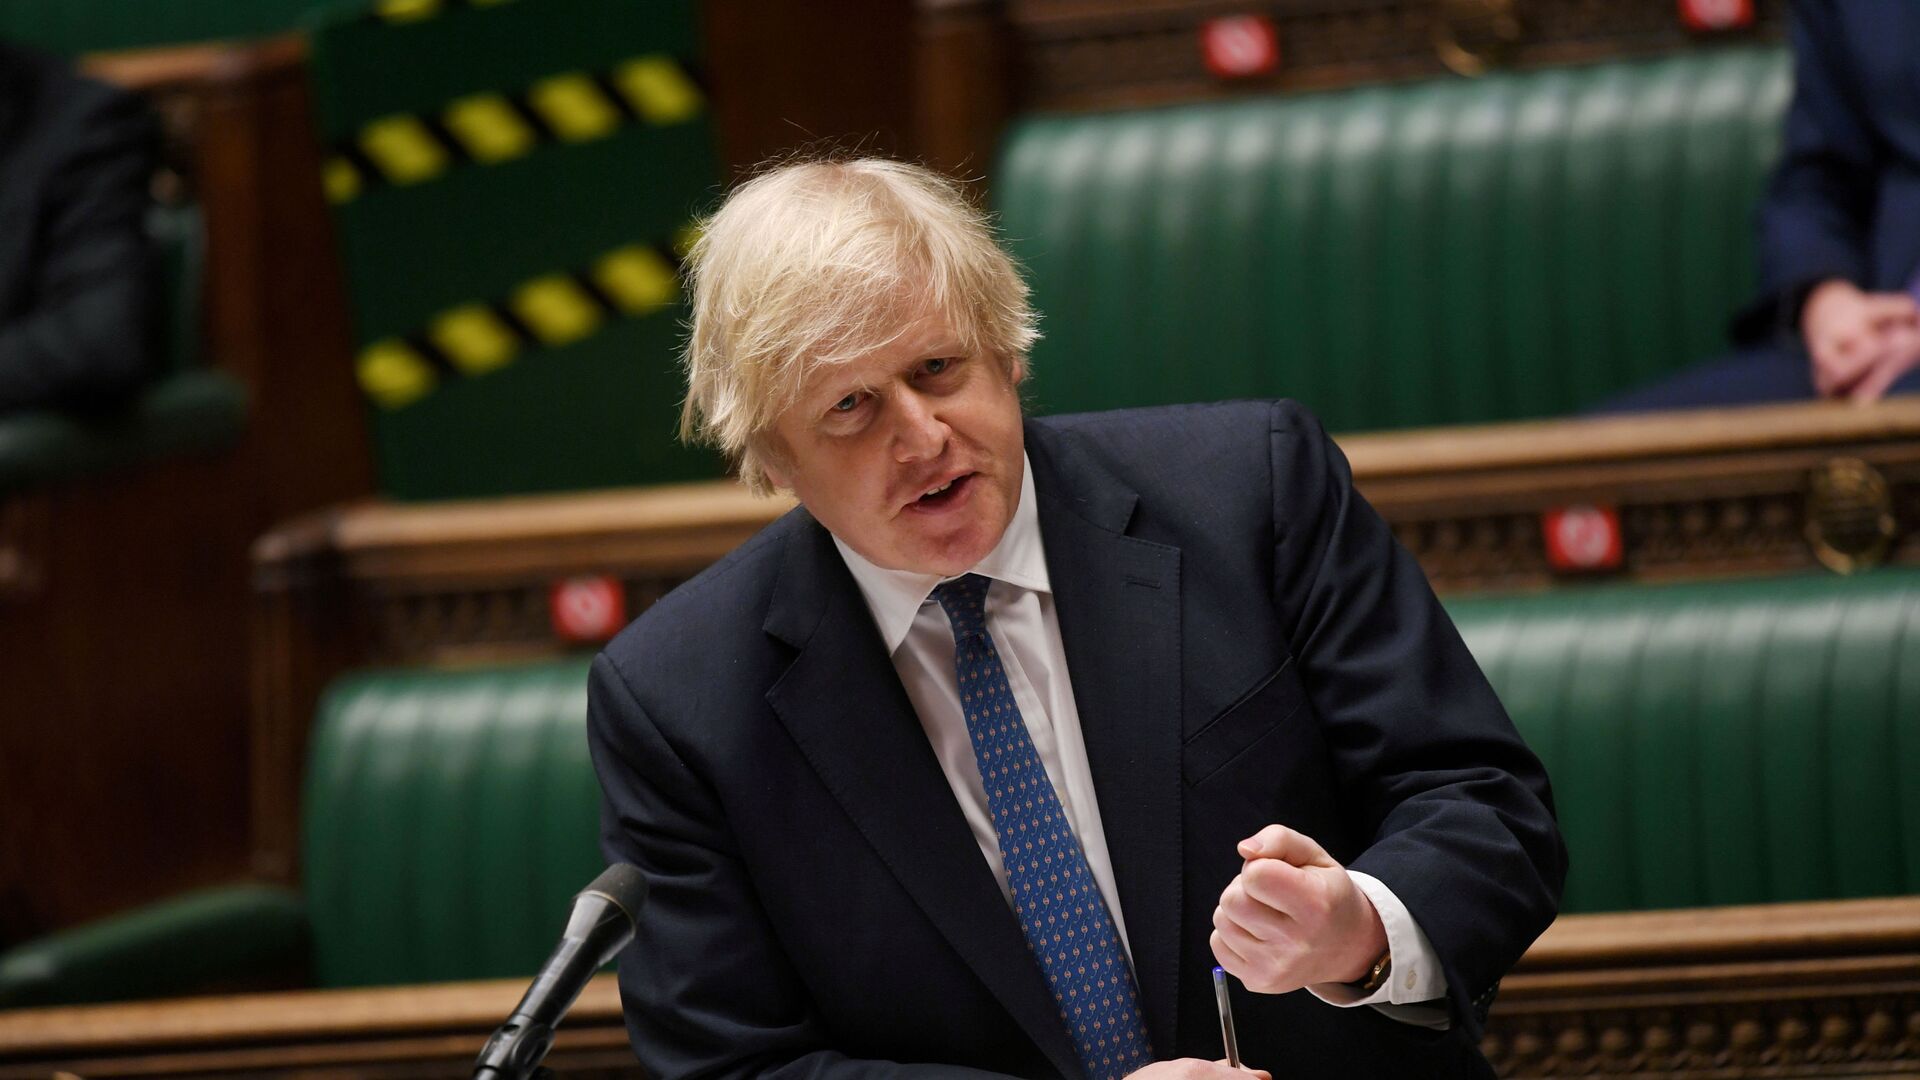 British Prime Minister Boris Johnson speaks during the weekly question time debate at the House of Commons in London, Britain, March 10, 2021 - Sputnik International, 1920, 24.04.2021